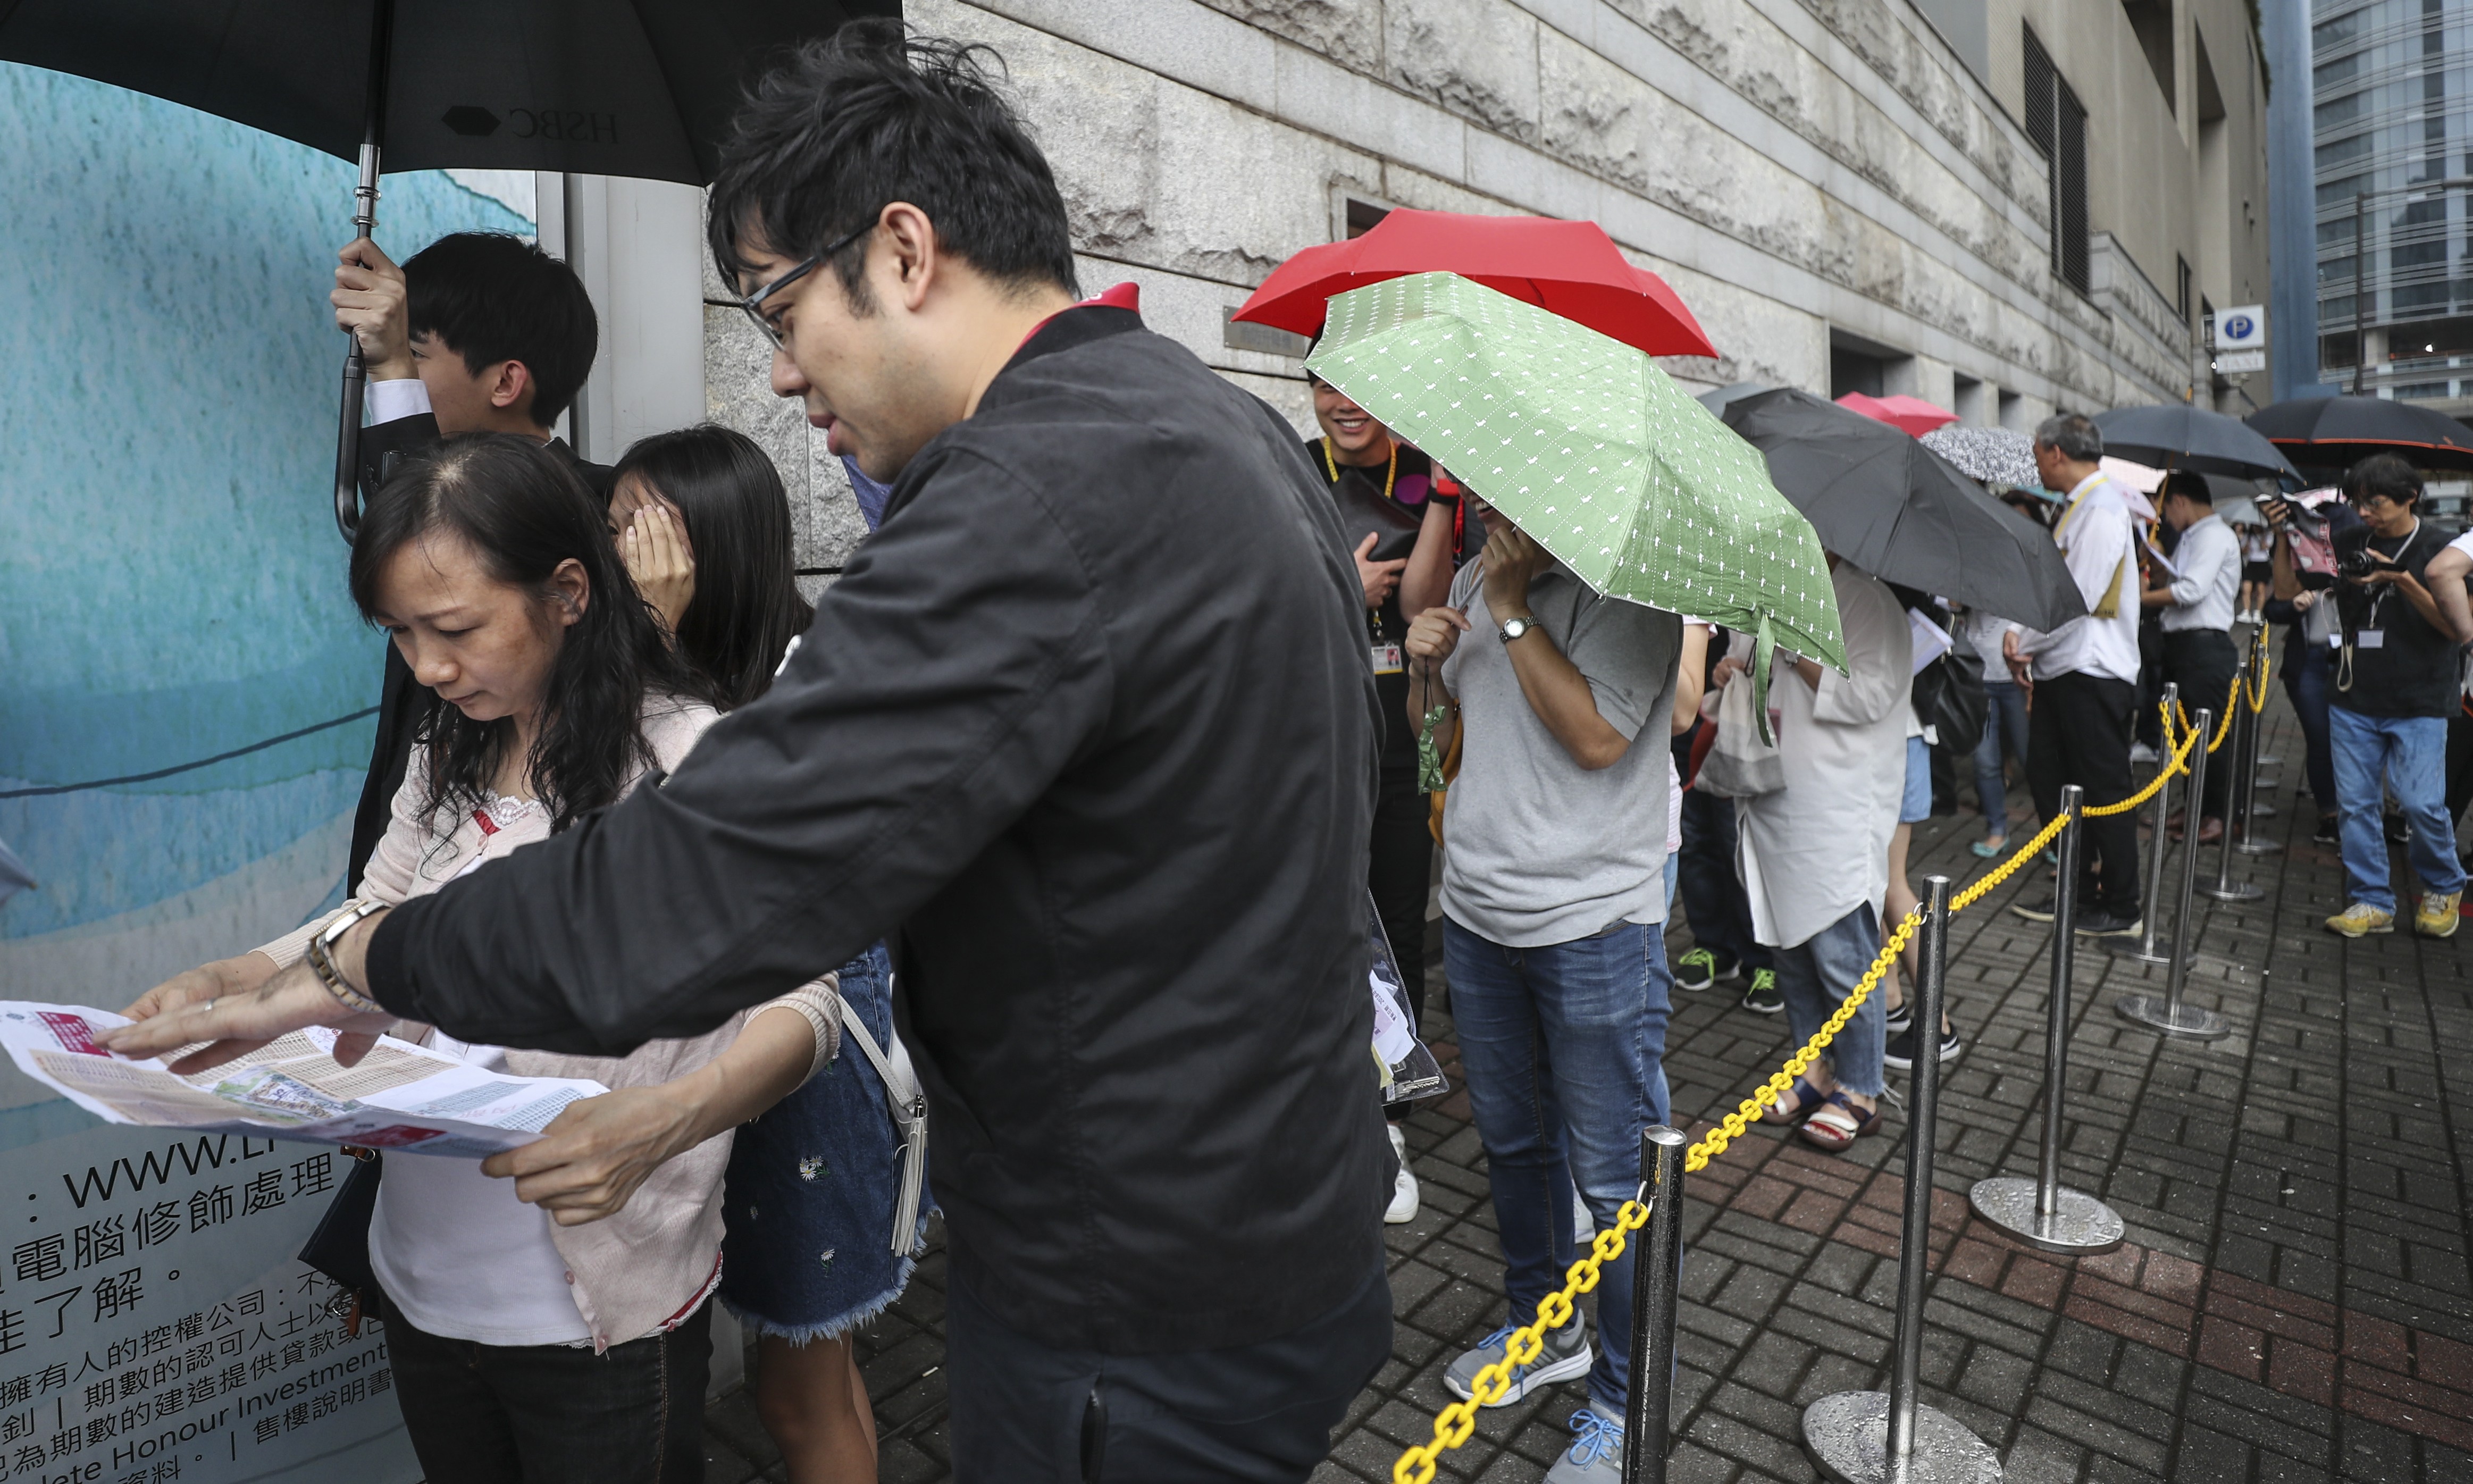 Nan Fung Development's LP6 project in Lohas Park attracted long queues of buyers at Octa Tower in Kowloon Bay, who braved a thunderstorm to snap up the units on offer on 8 September 2018. Photo: SCMP/Edward Wong.